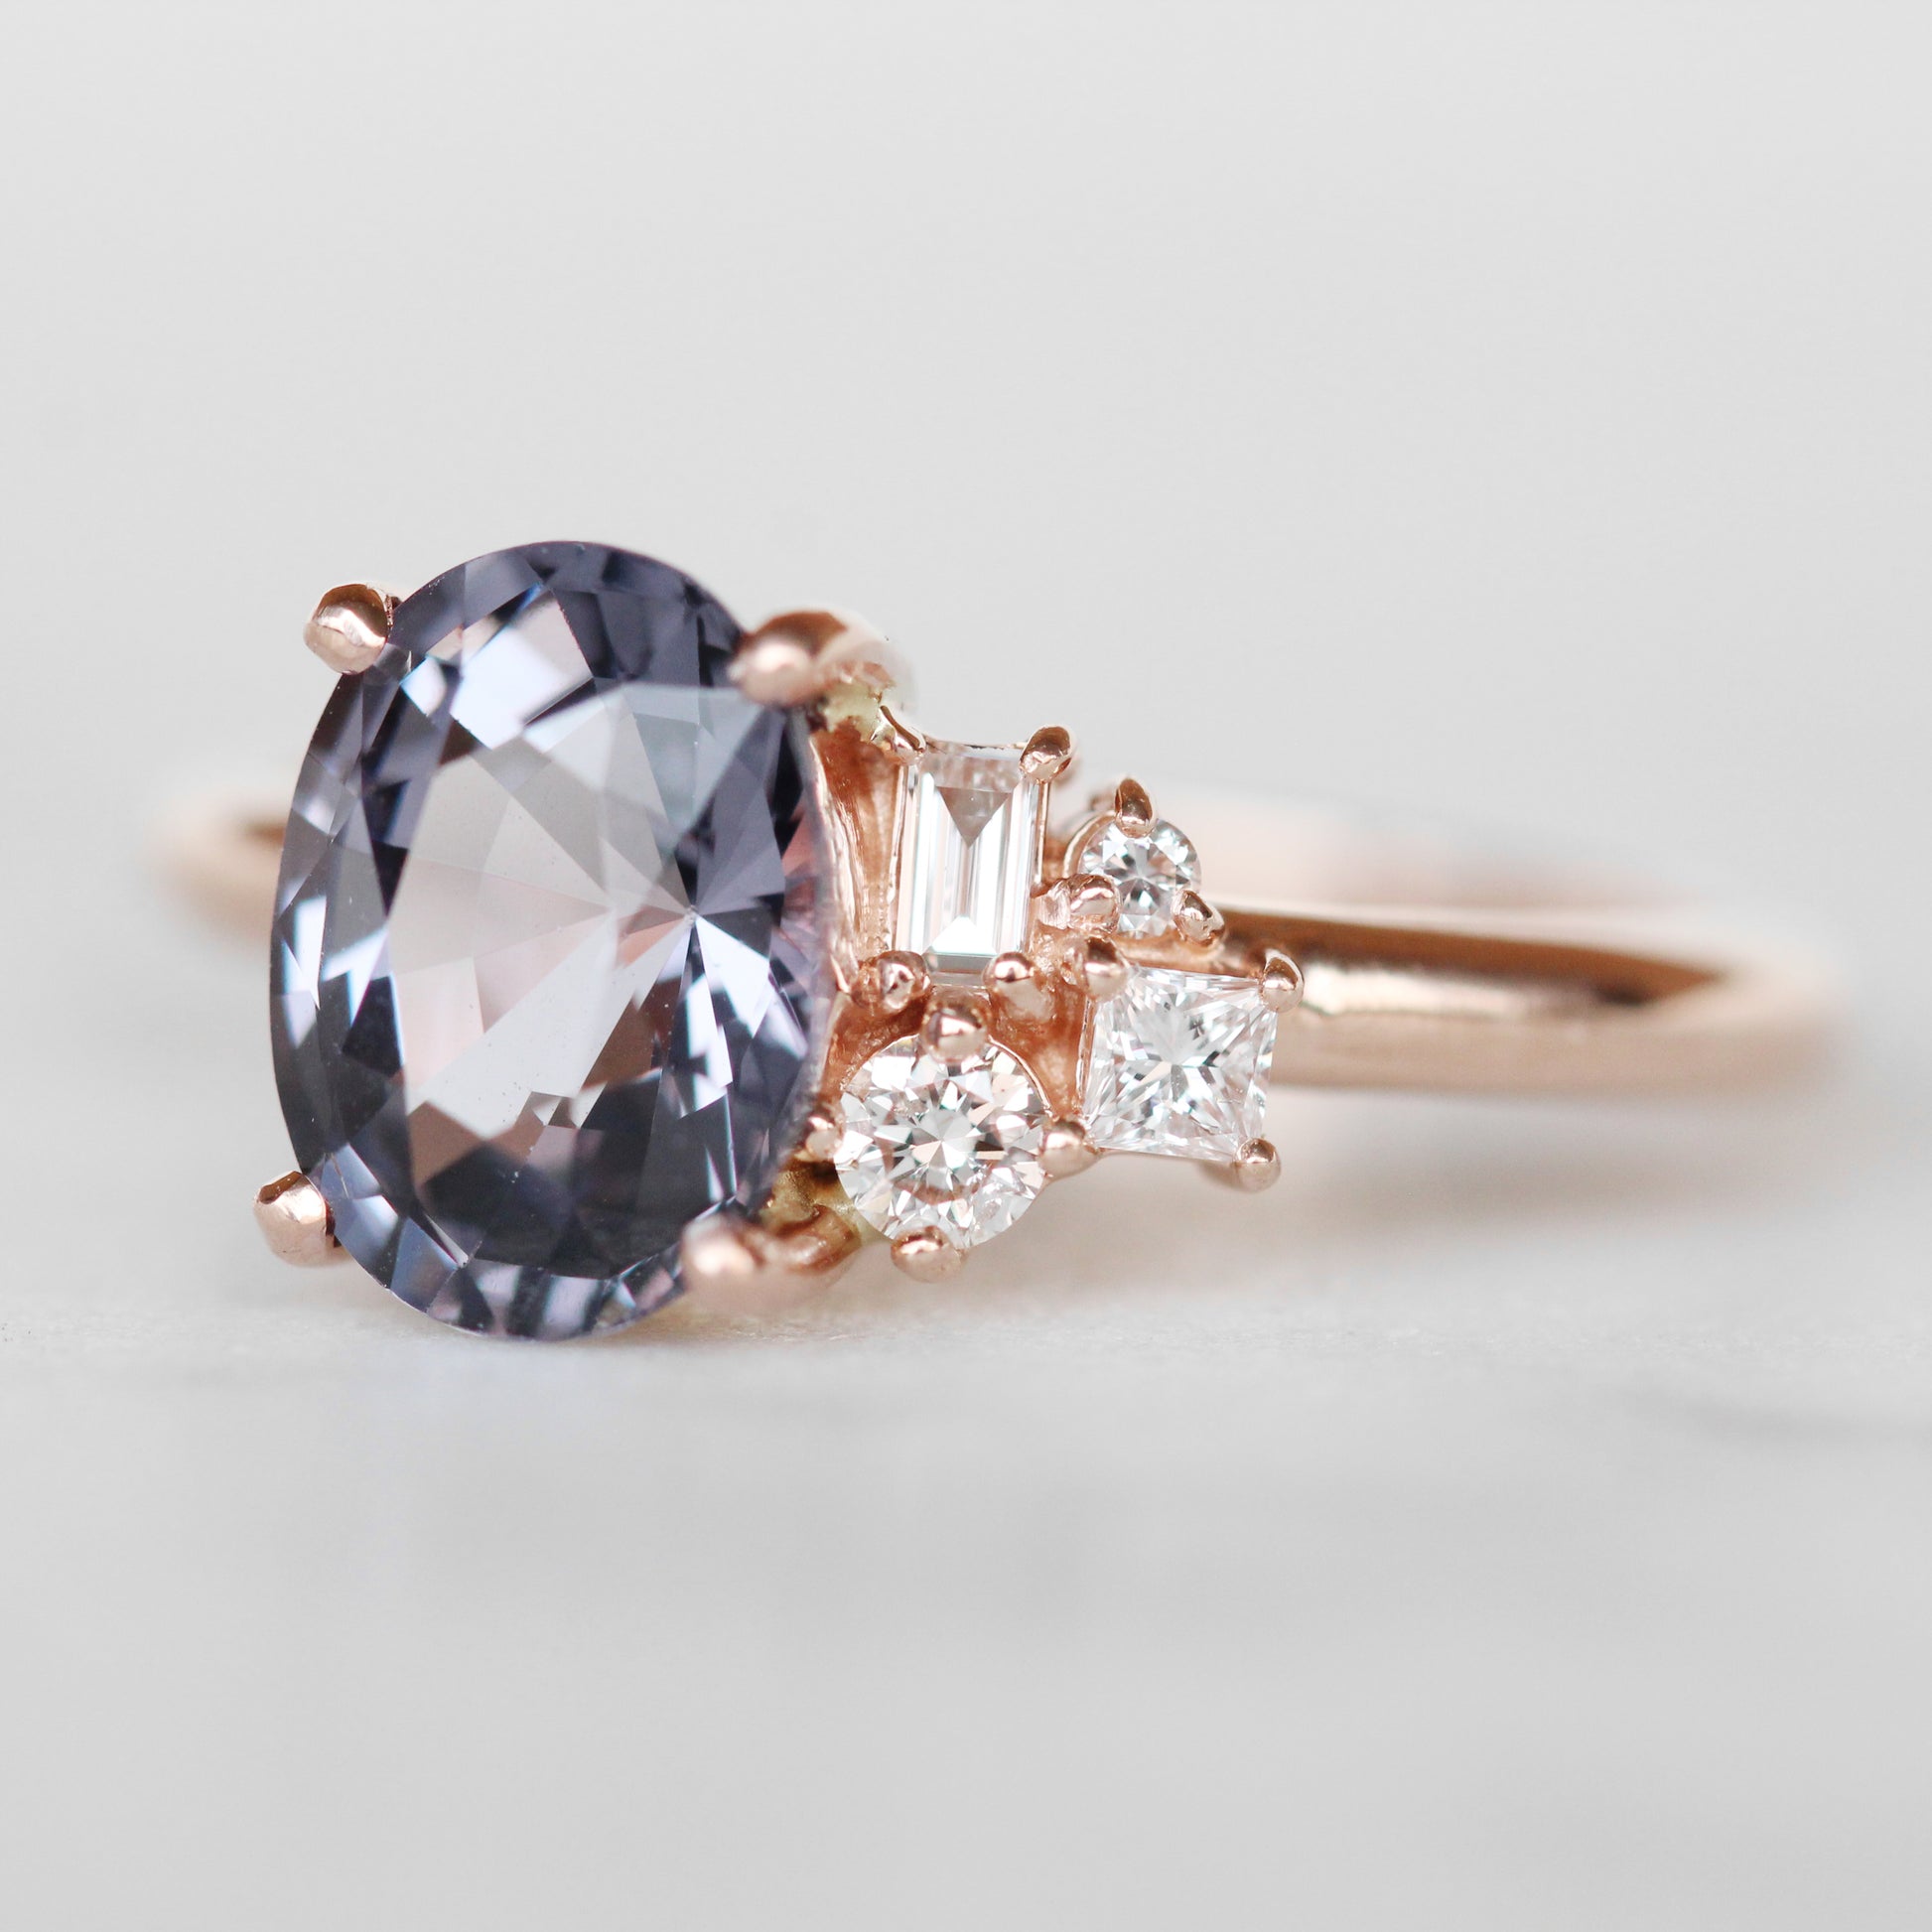 Abigail Setting - Midwinter Co. Alternative Bridal Rings and Modern Fine Jewelry